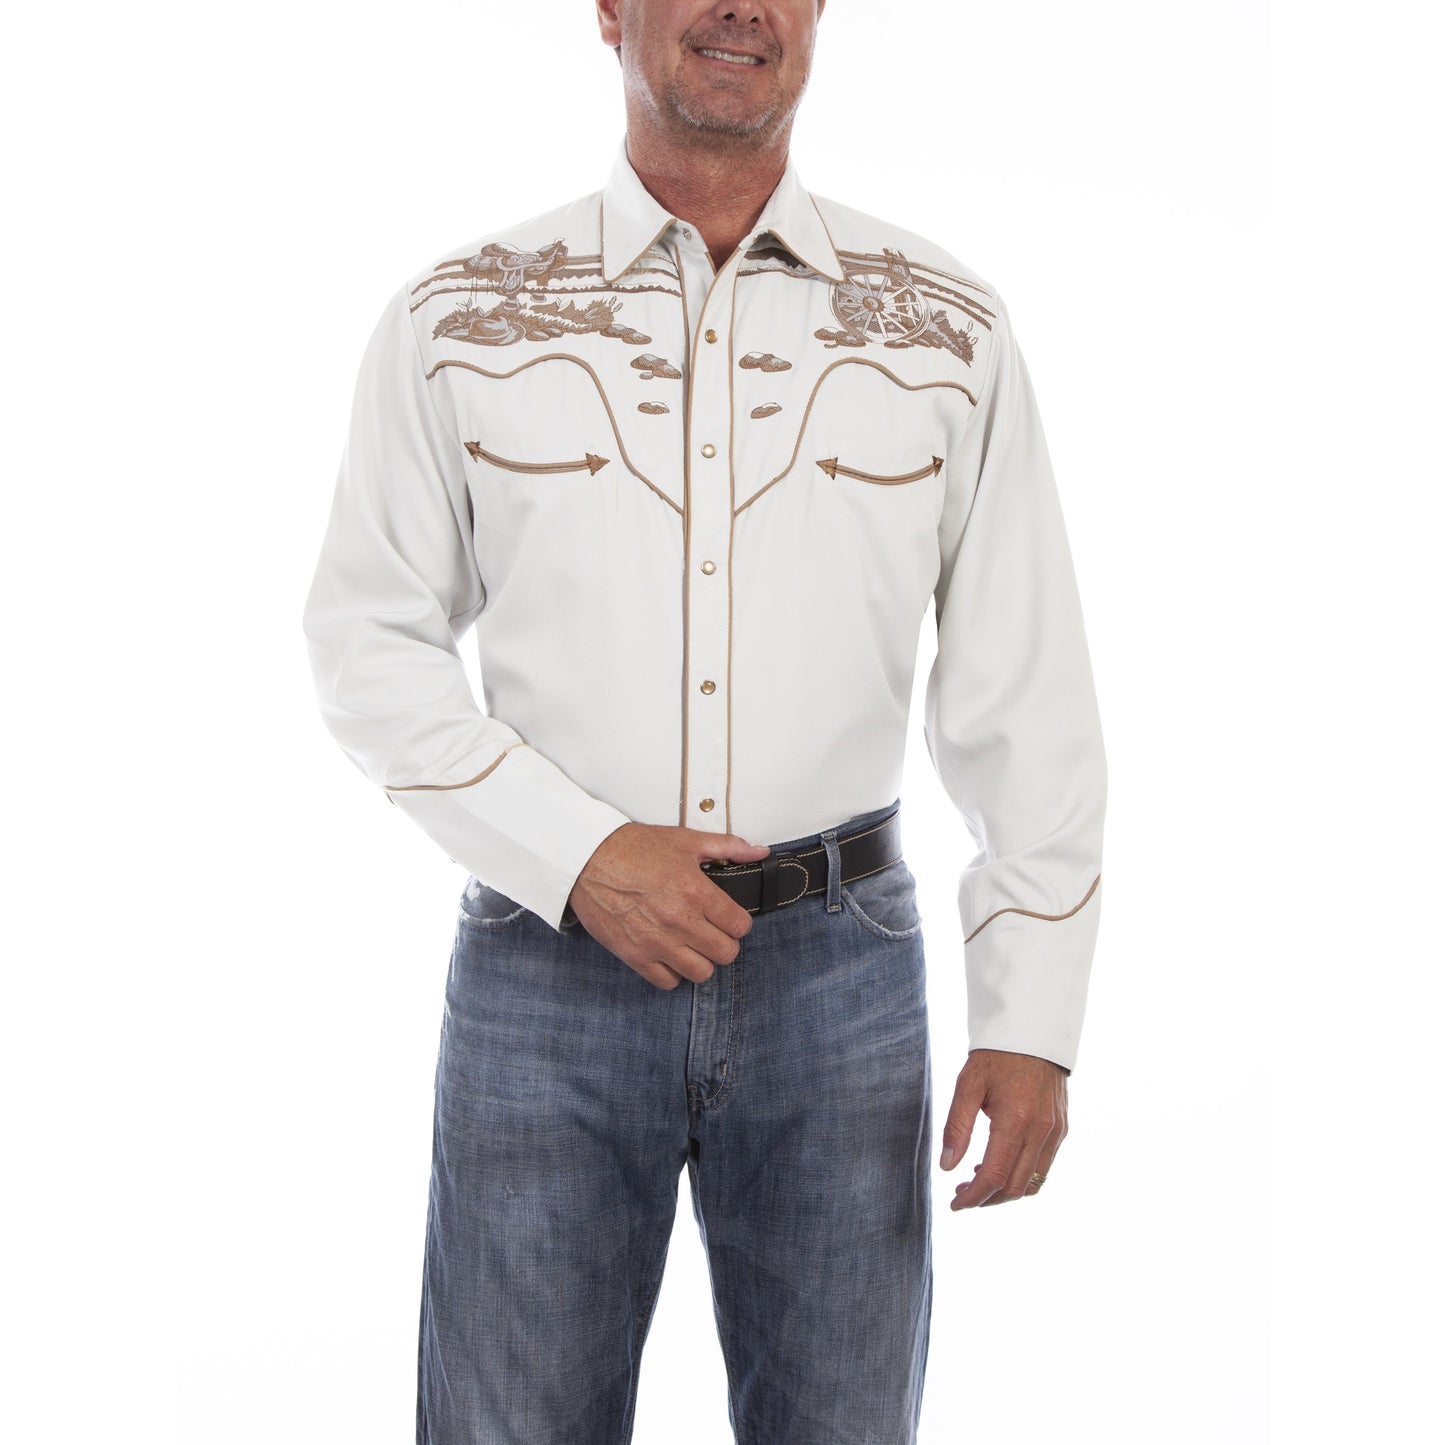 Scully Men's Wagon Wheel Western Embroidery White Stone Shirt P-902